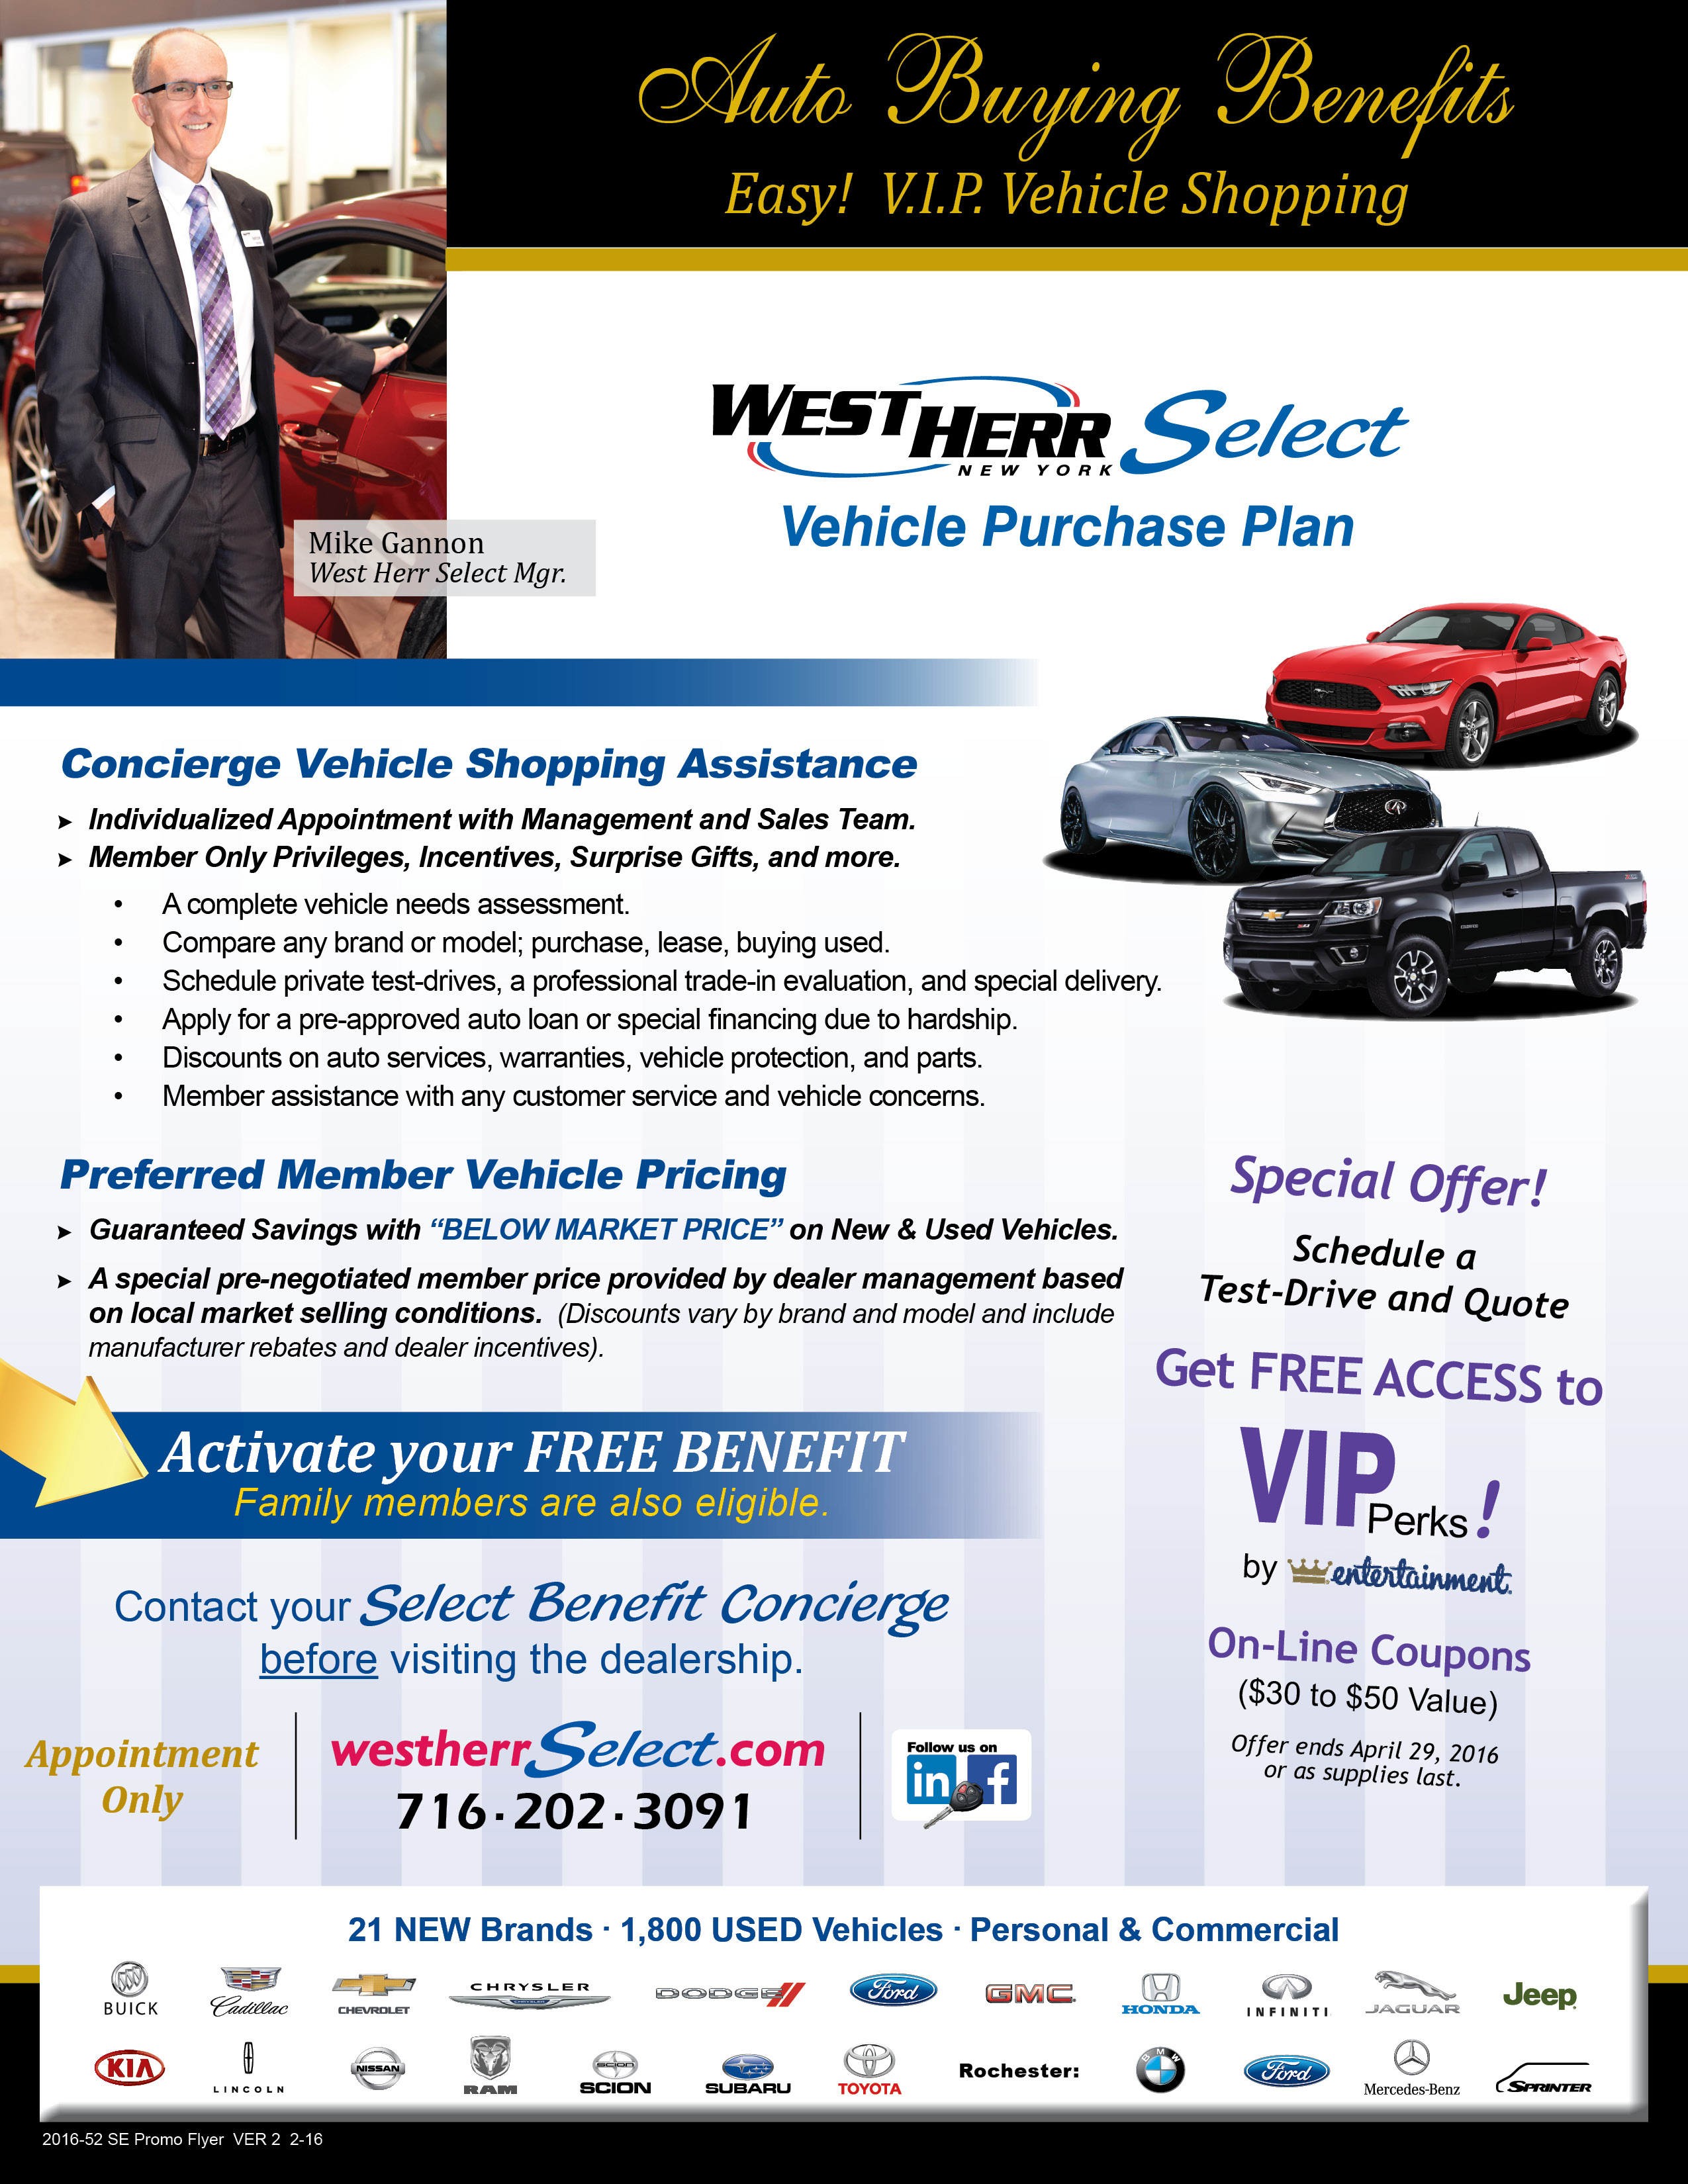 WEST HERR New York Select Vehicle Purchase Plan